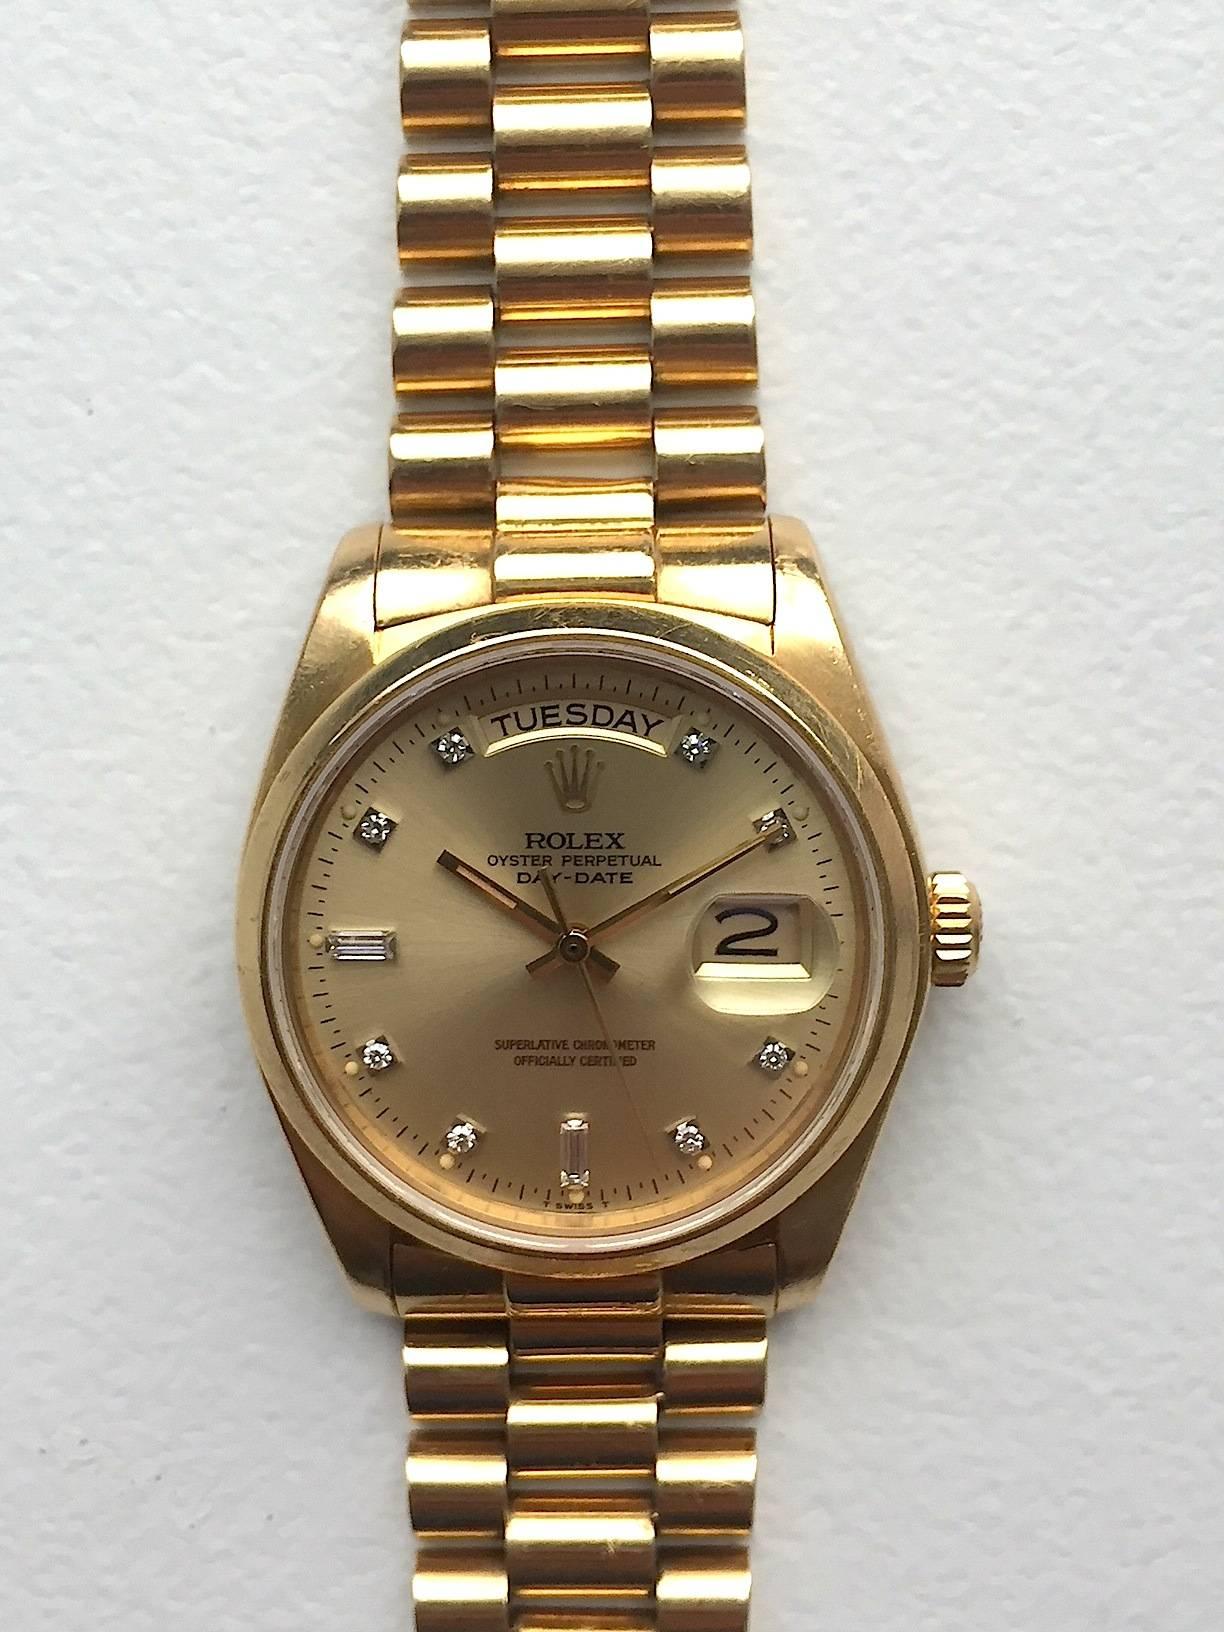 Rolex 18K Yellow Gold Oyster Perpetual Automatic Day-Date Wristwatch 
Beautiful Factory Champagne Diamond Dial with Diamond Hour Markers
Rare Rolex Reference from Late 1970's with Smooth 18K Yellow Gold Bezel
18K Yellow Gold Case
36mm in size